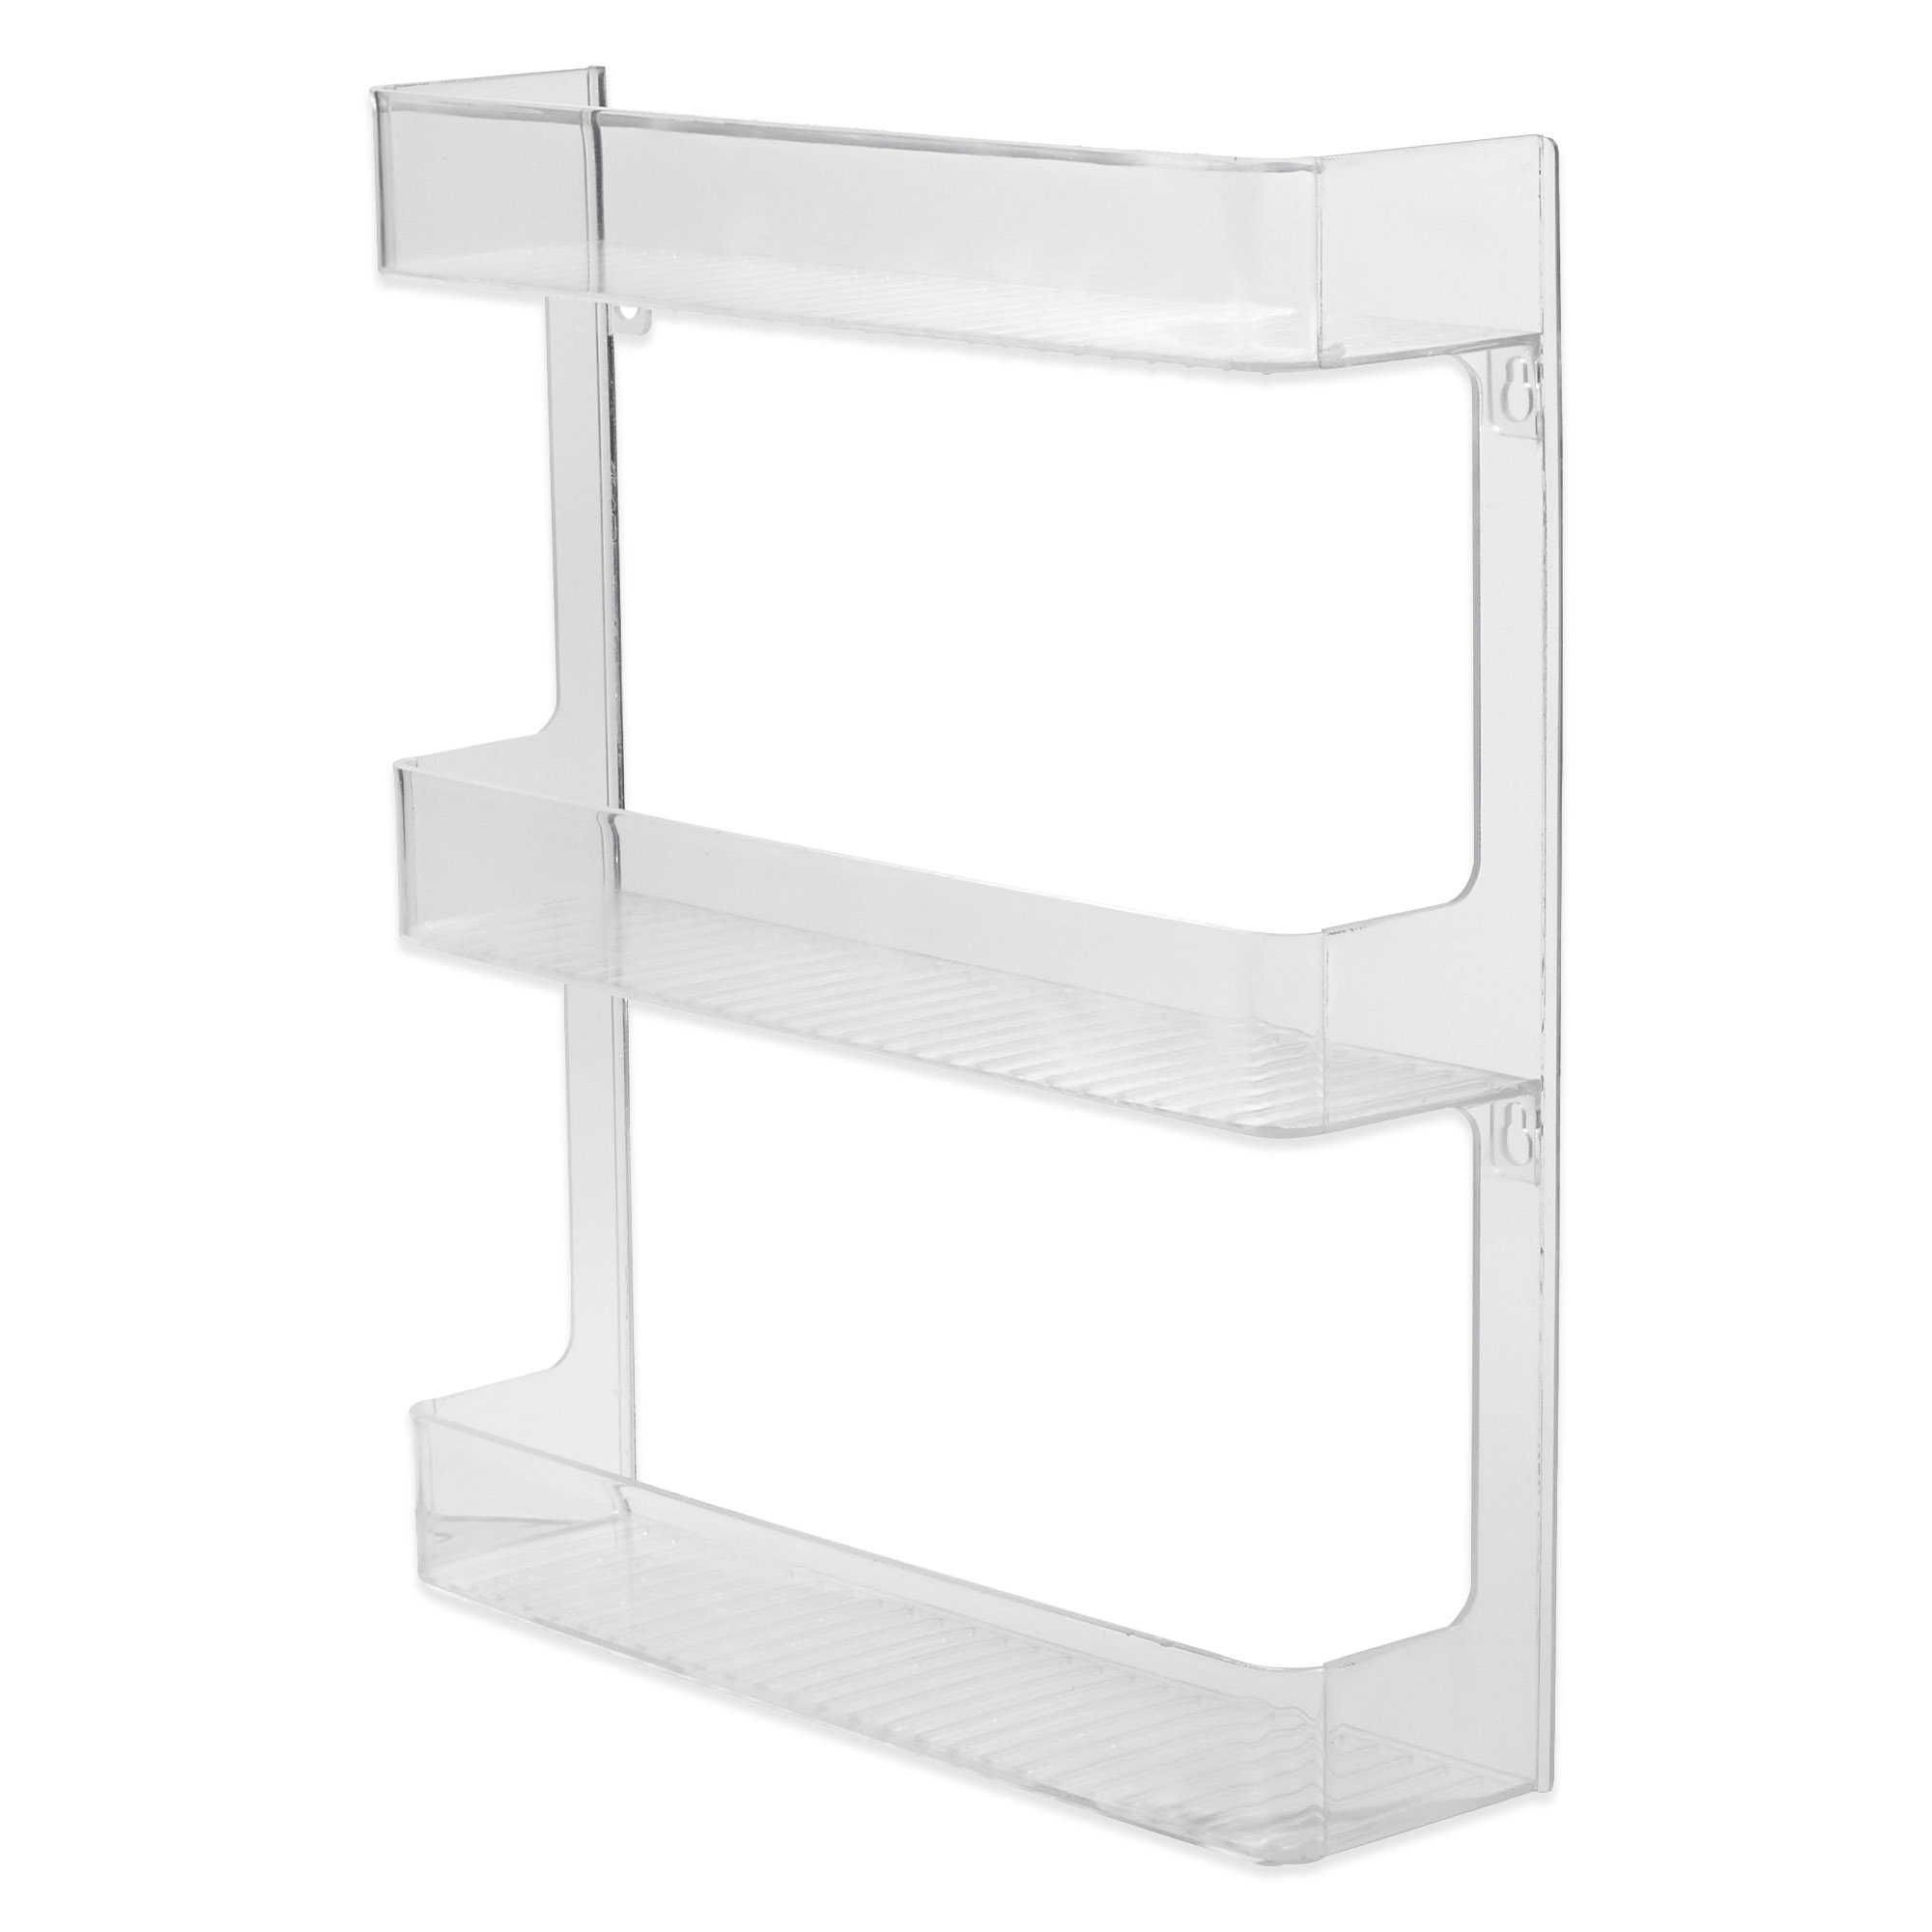 Plastic wall mounted cabinets 7